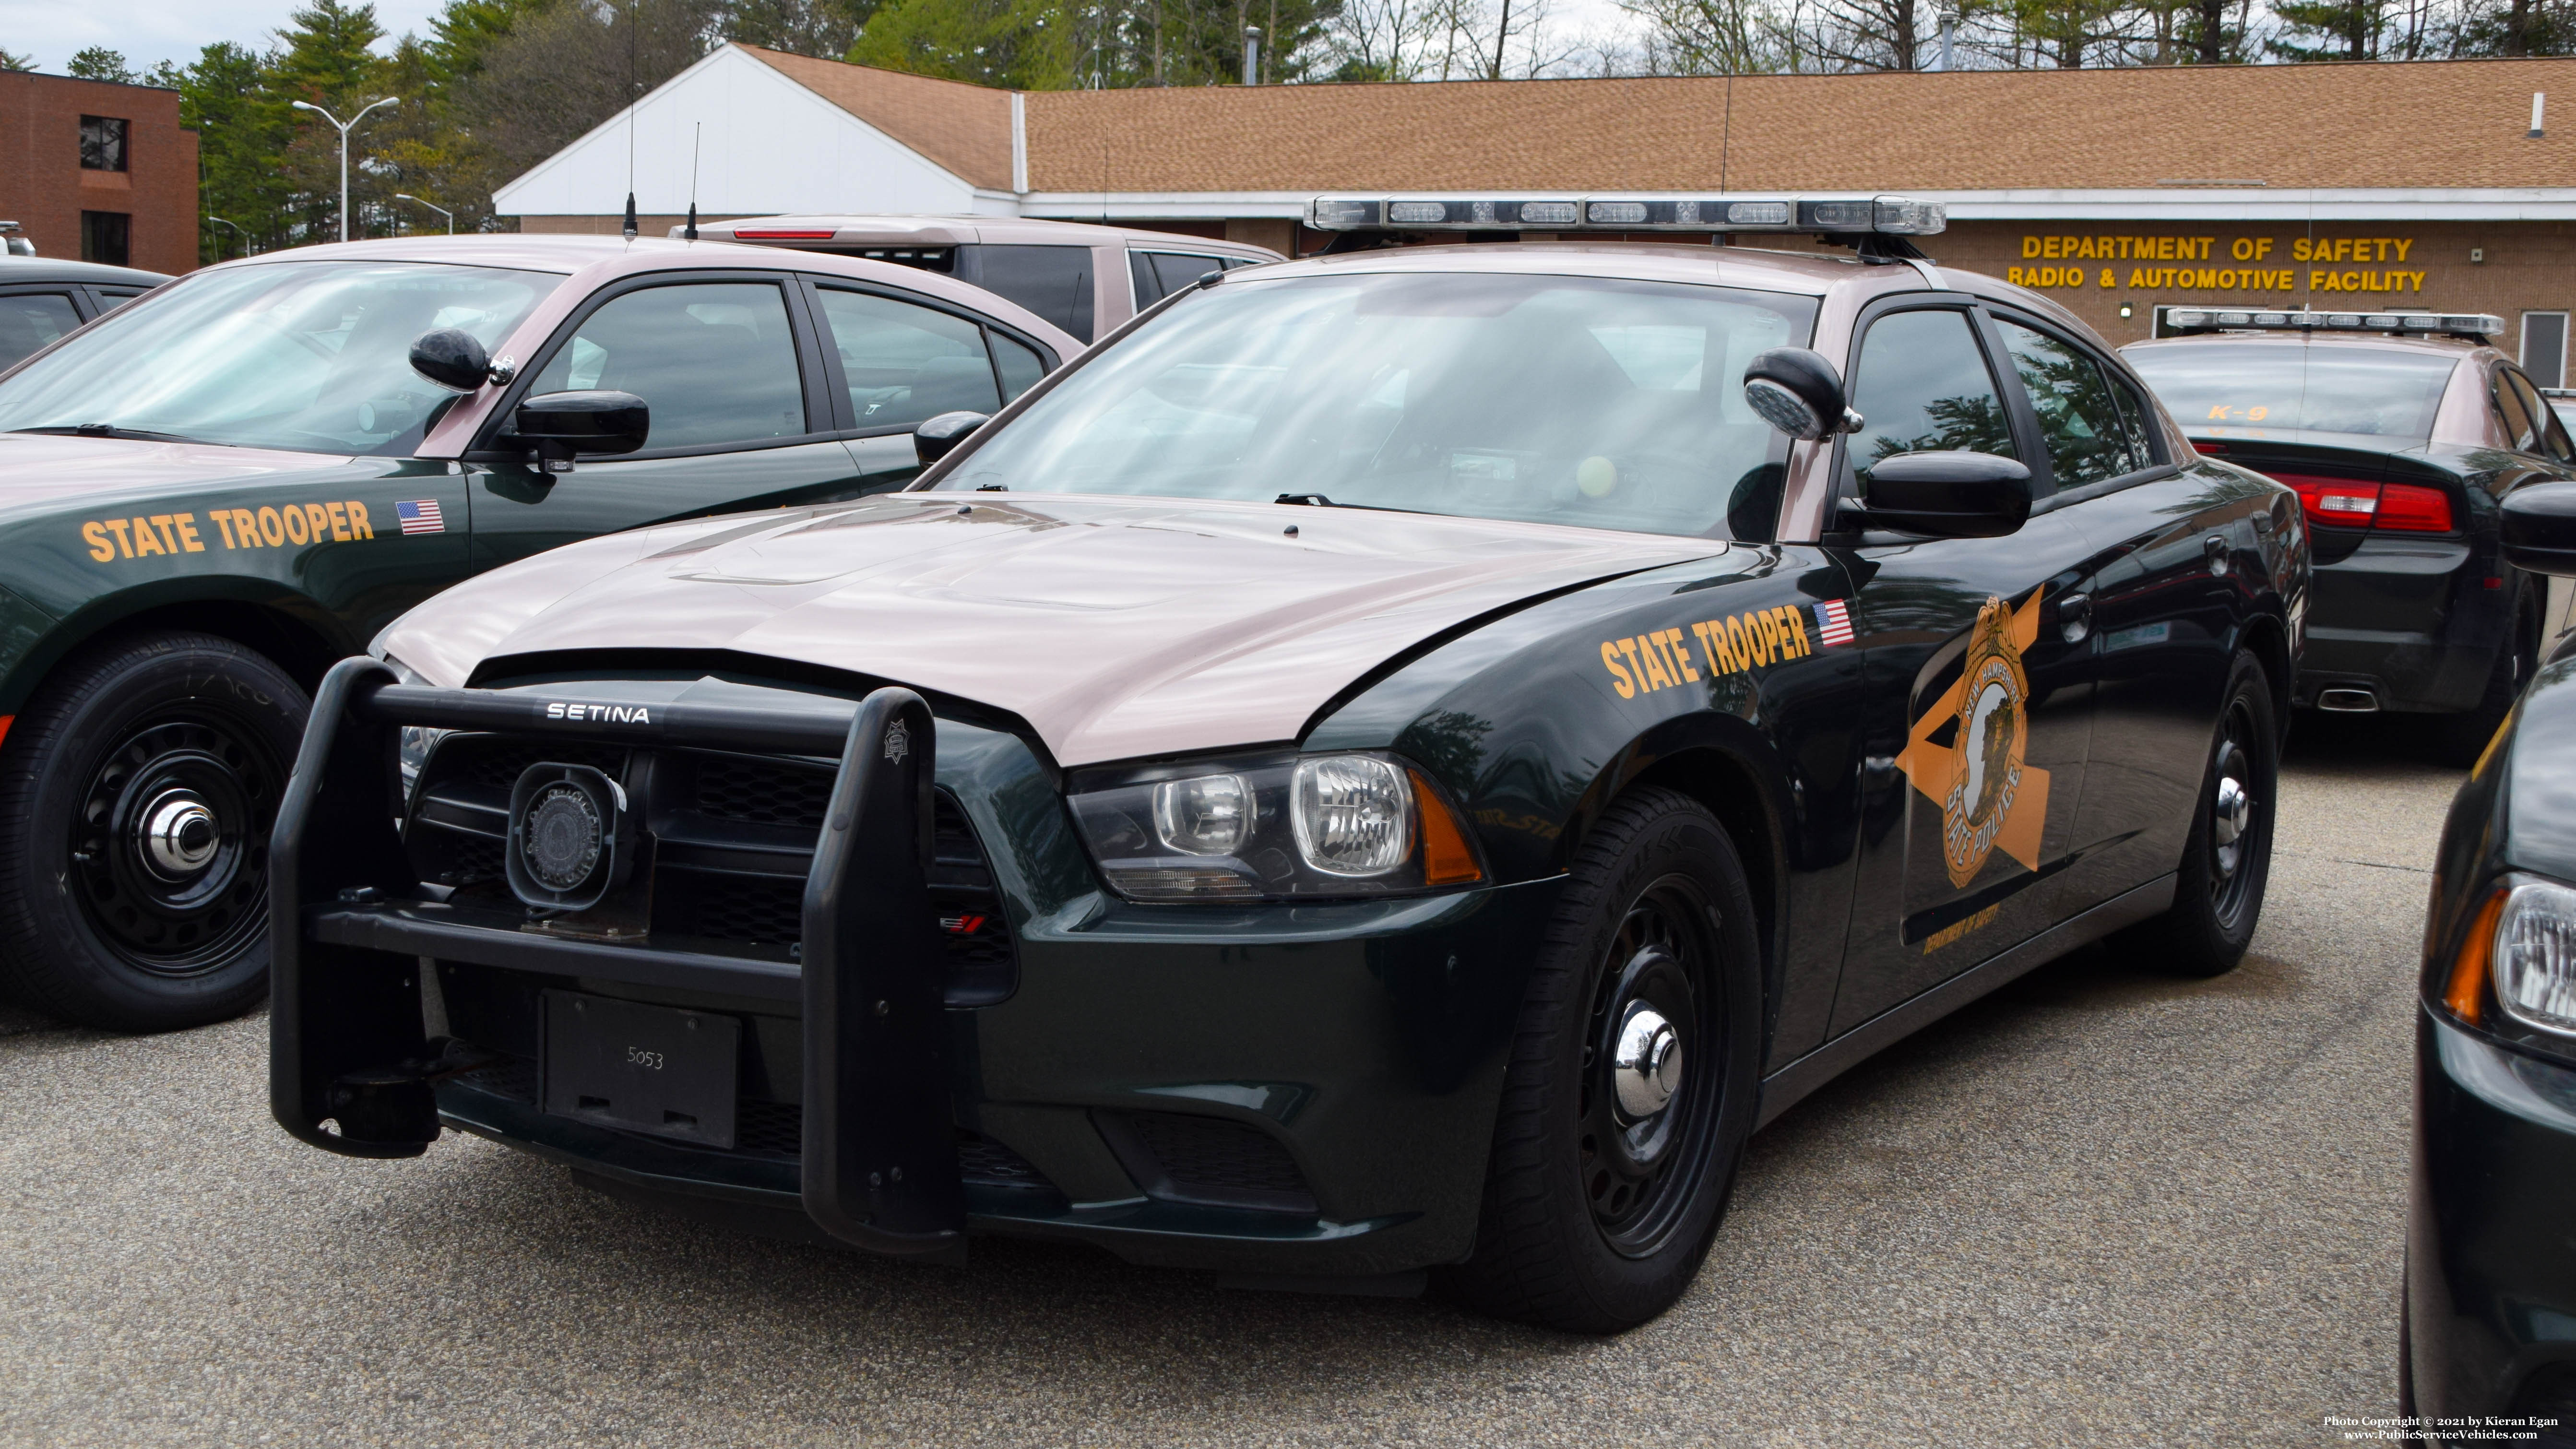 A photo  of New Hampshire State Police
            Unassigned Unit, a 2014 Dodge Charger             taken by Kieran Egan